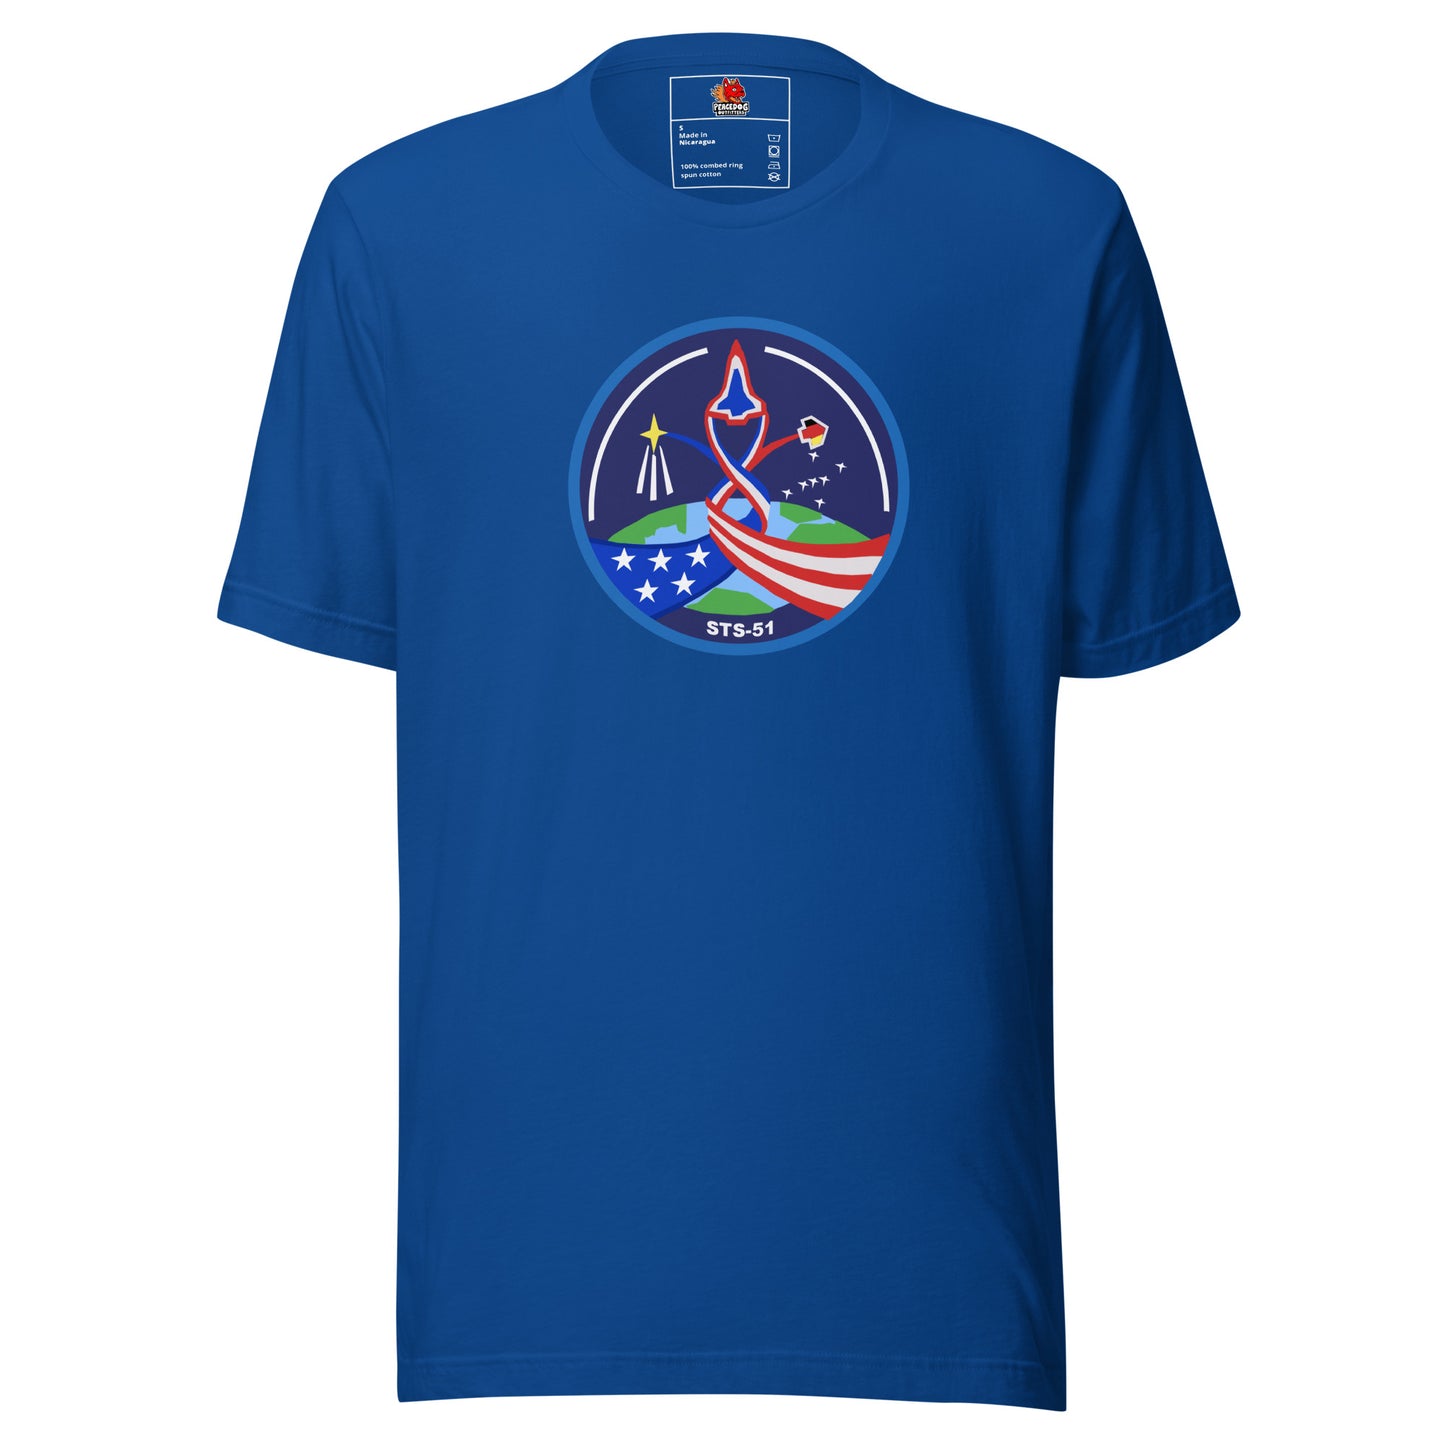 NASA Shuttle Mission Patch STS-51 T-shirt